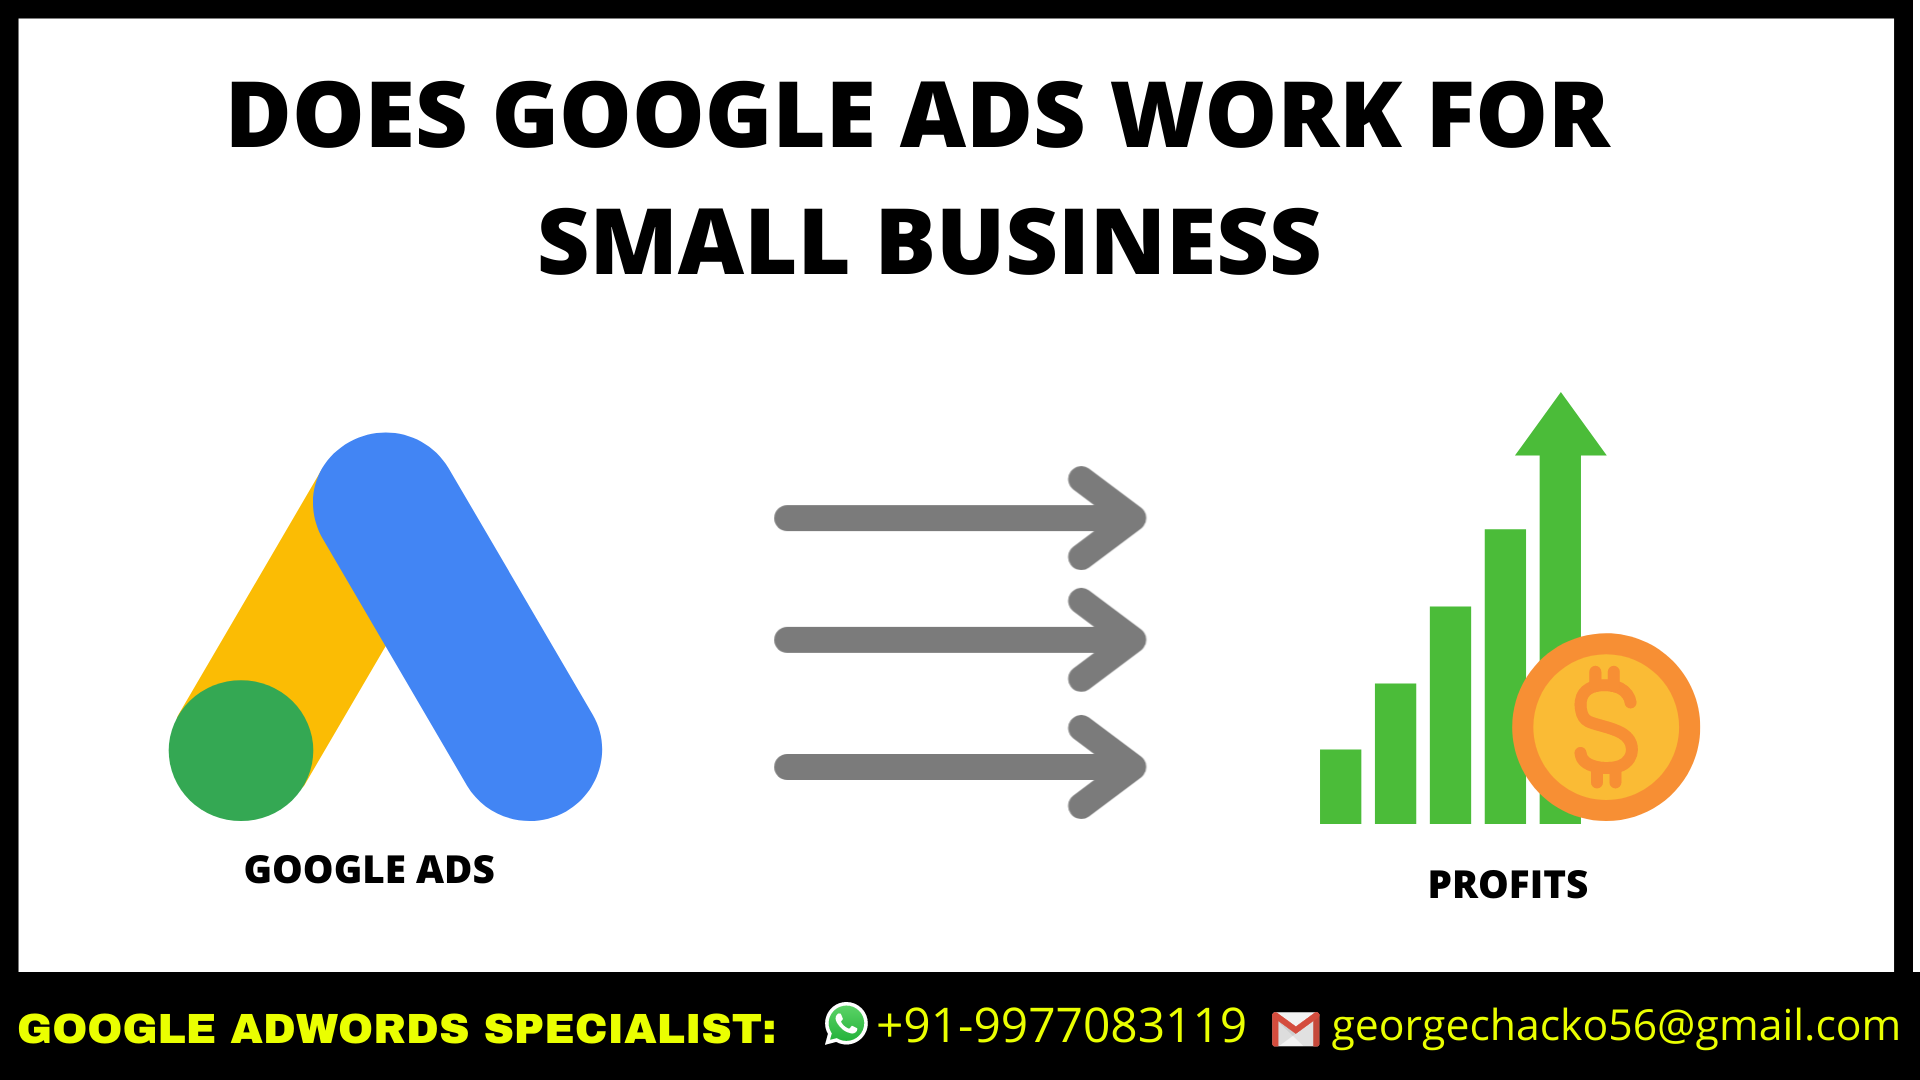 Does Google Ads Work for Small Business